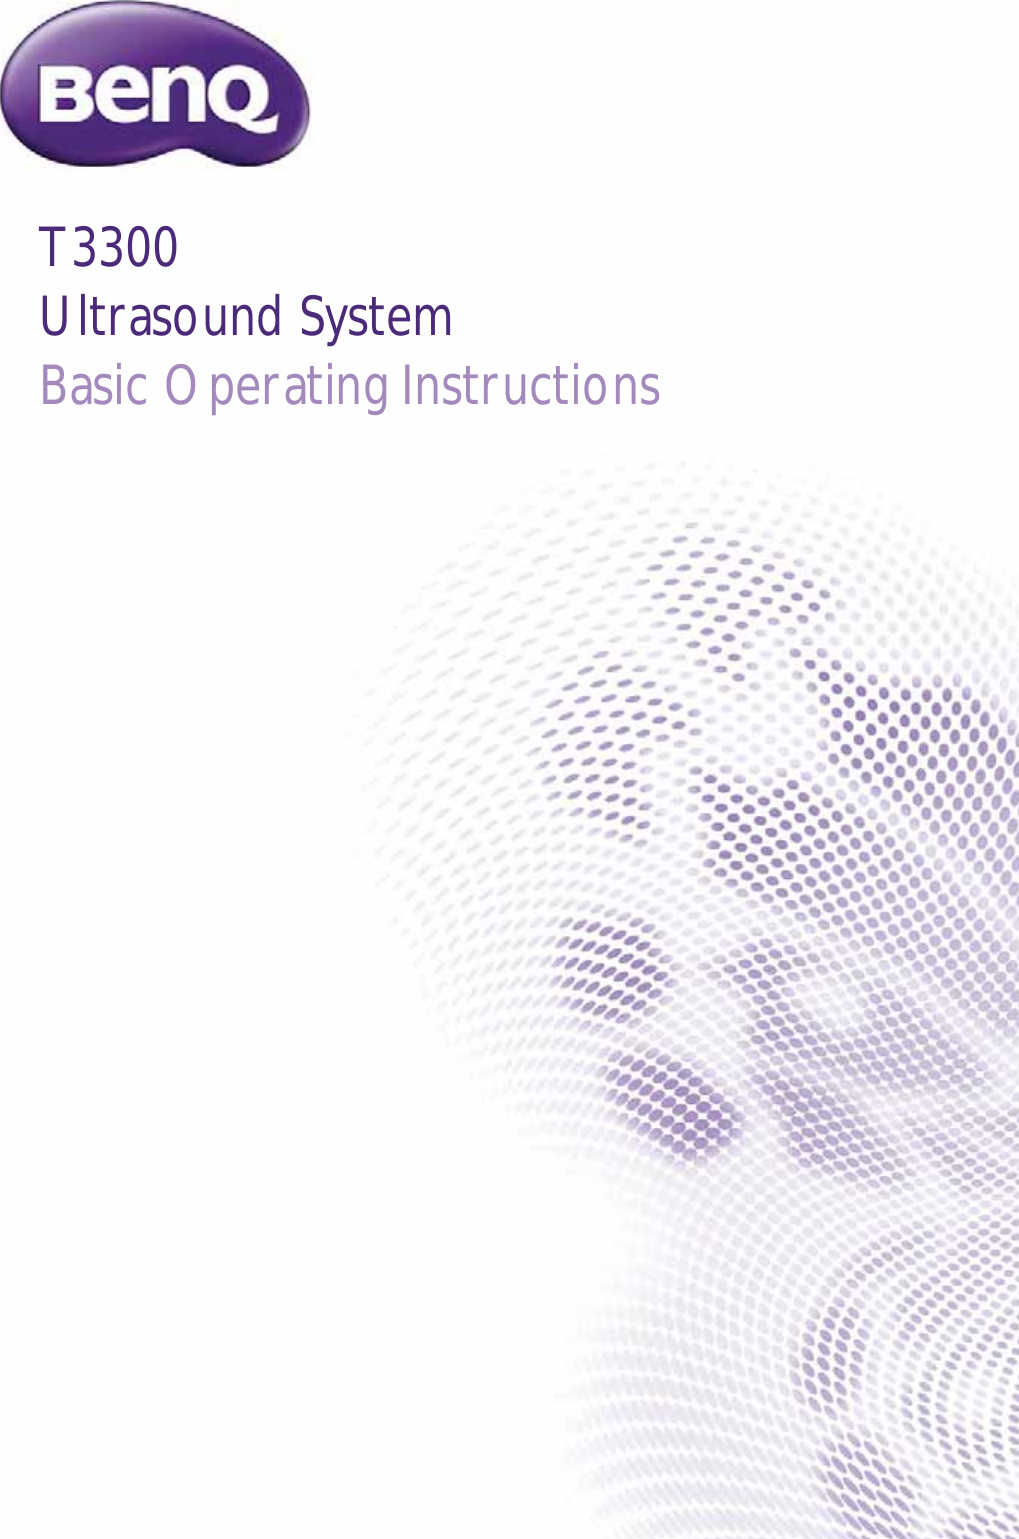 T3300Ultrasound SystemBasic Operating Instructions